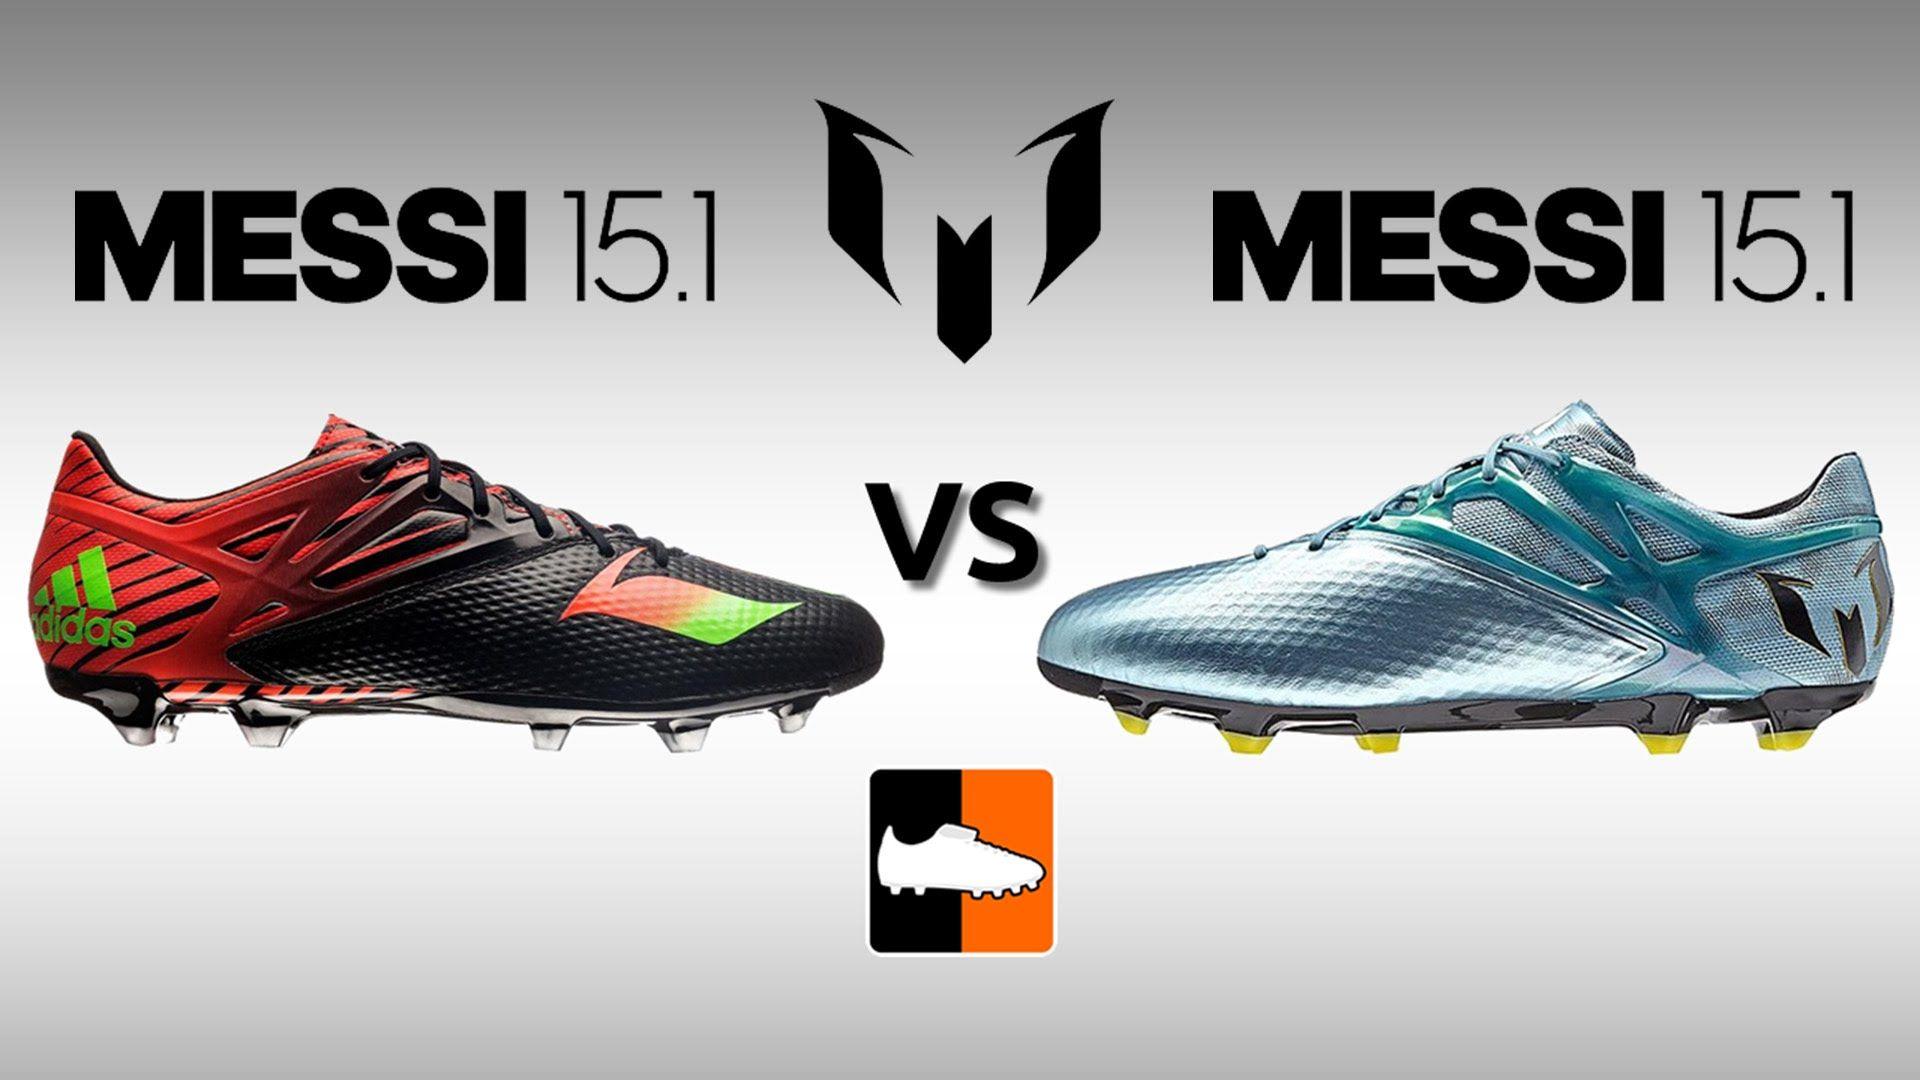 Messi 15.1 of Differences in Latest adidas Boots for Lionel